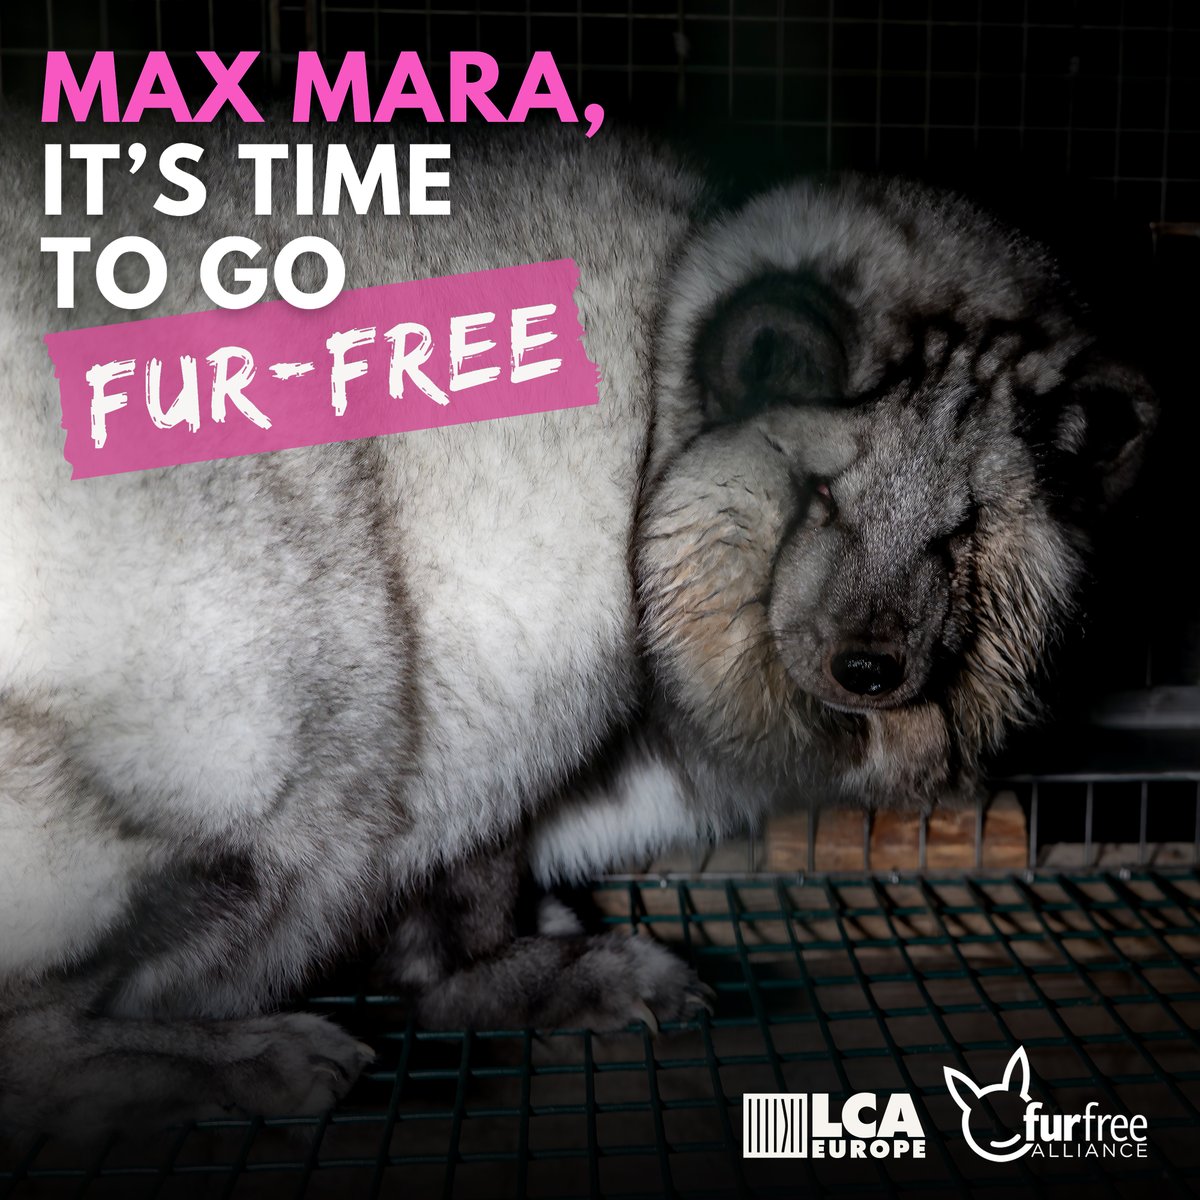 🐾 Did you know that the fur in Max Mara's products comes from animals that suffer their entire lives in tiny cages? These innocent animals deserve to live free from exploitation. Let's demand change from Max Mara and stand up for animal rights! Let’s demand a #FurFreeMaxMara!